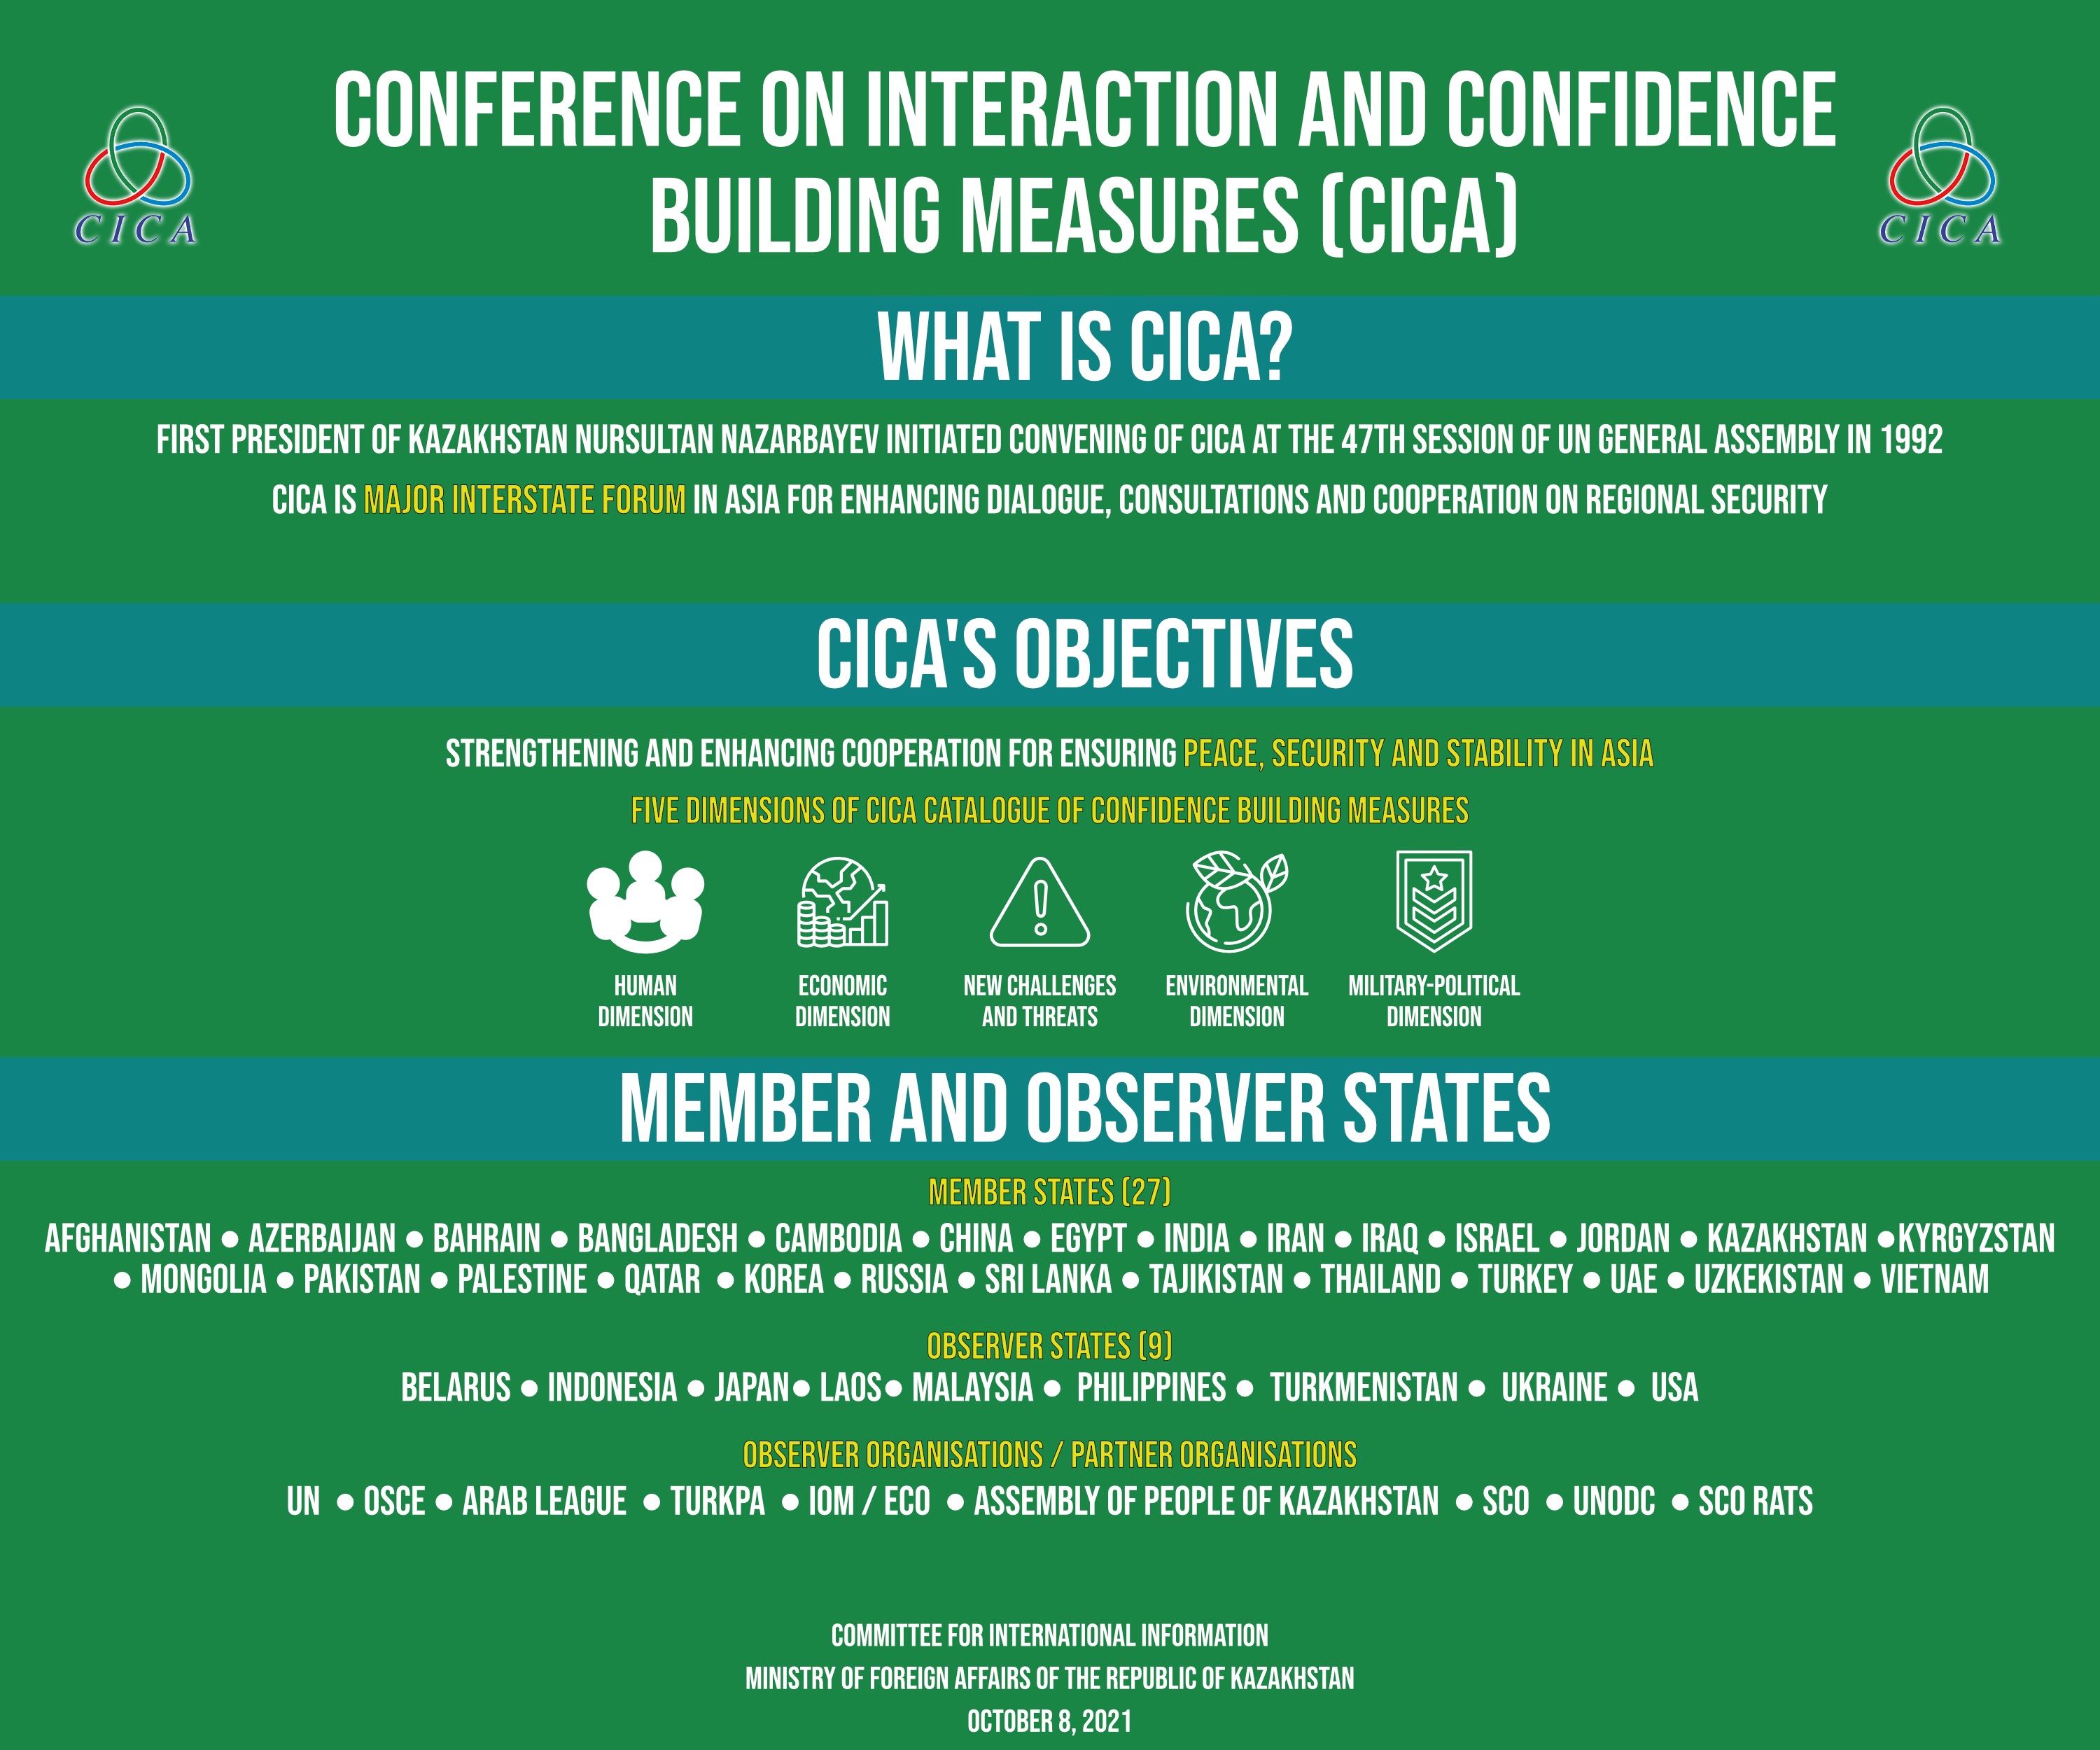 The Conference on Interaction and Confidence Building Measures in Asia